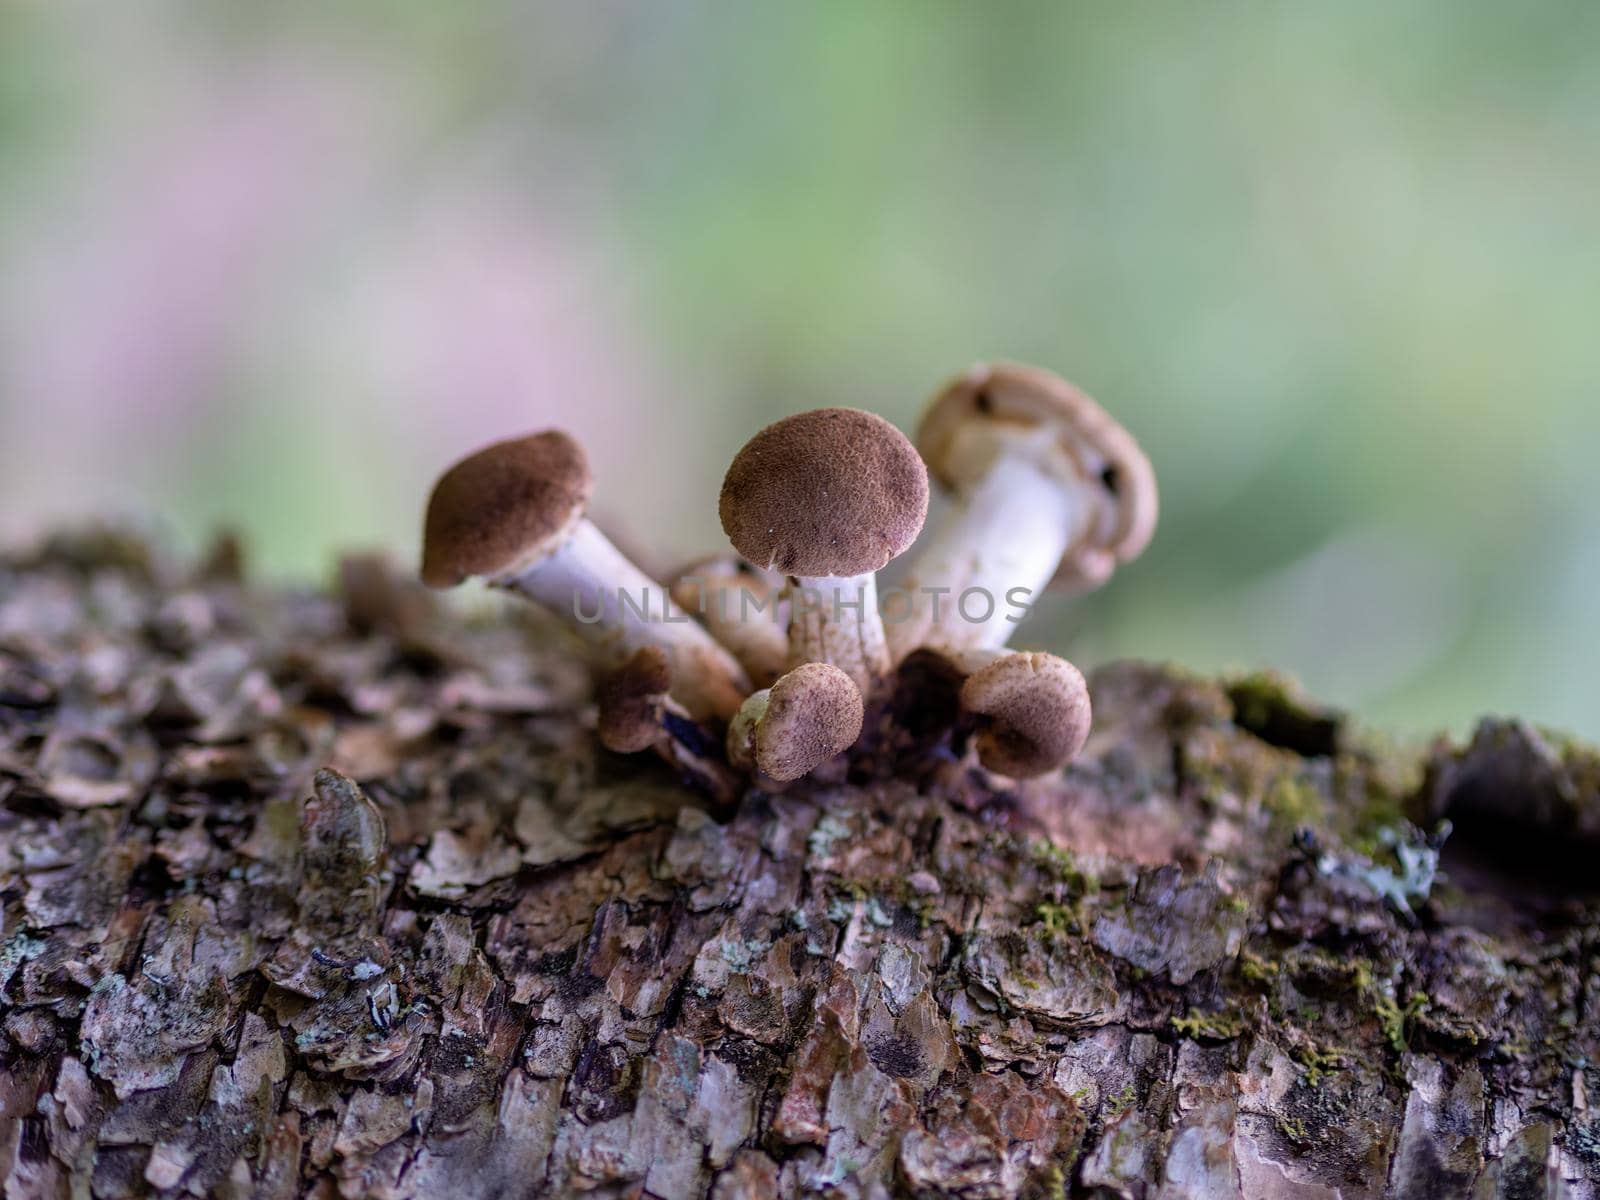 Honey fungus Mushrooms at tree stub in autumn forest. Armillaria mellea. by Andre1ns